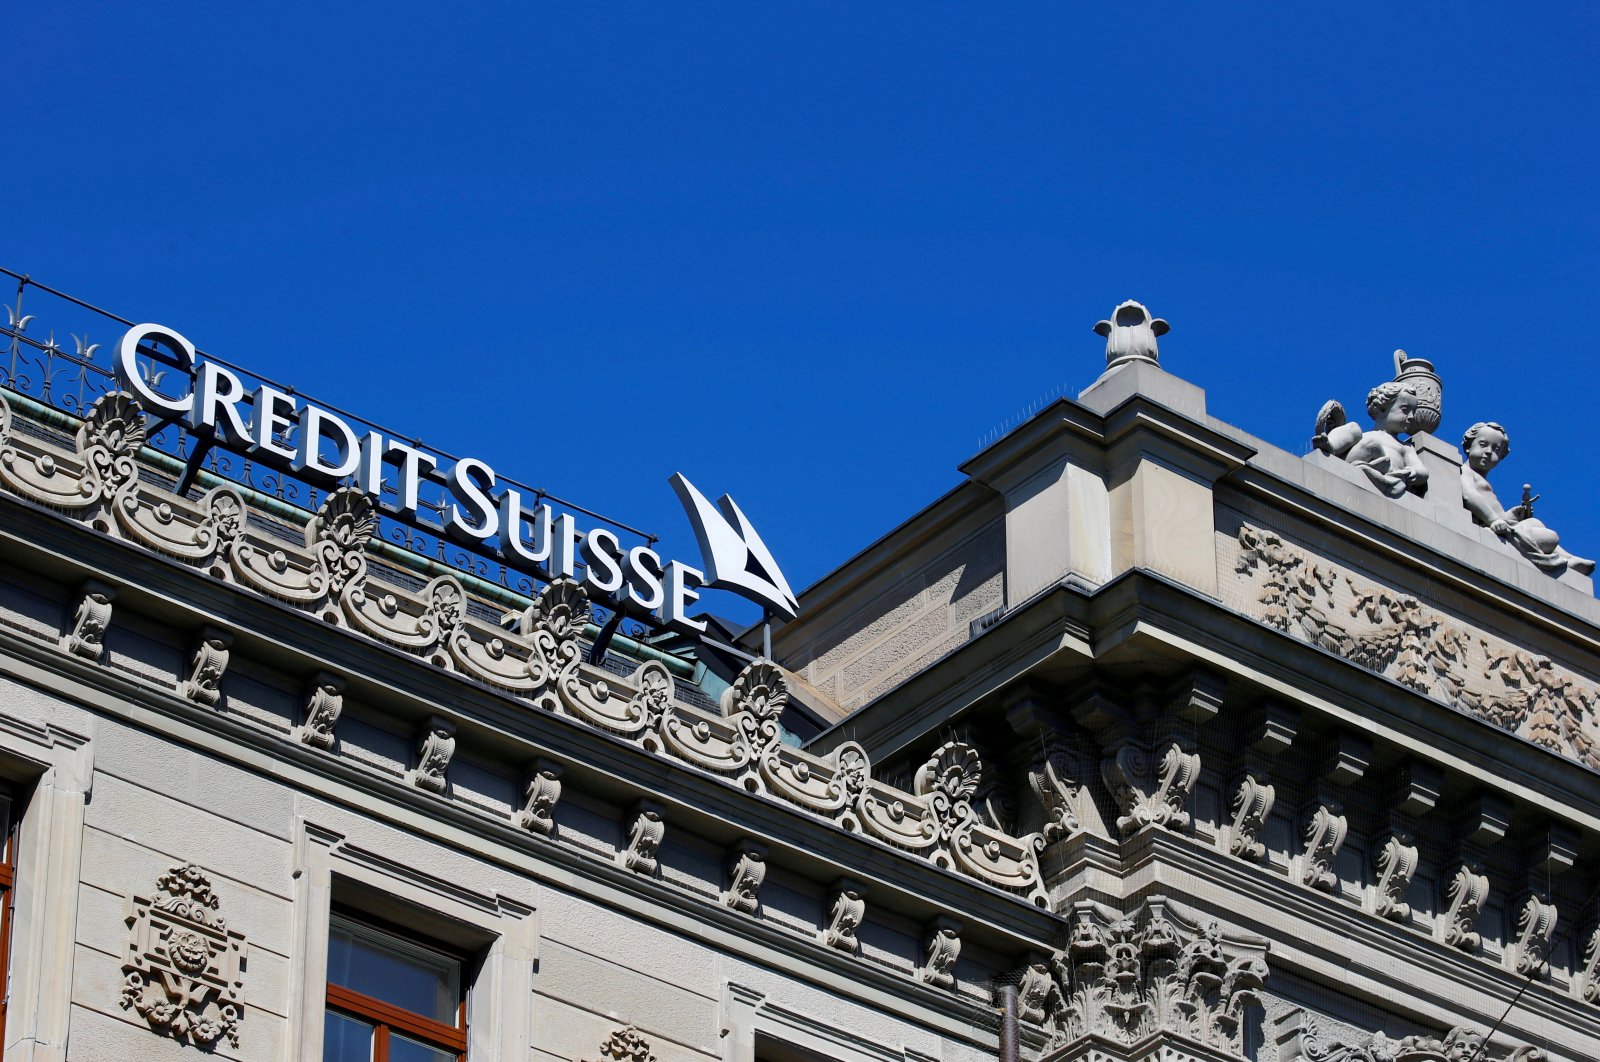 The headquarters of Swiss bank Credit Suisse in Zurich, Switzerland, March 24, 2021. (Reuters Photo)